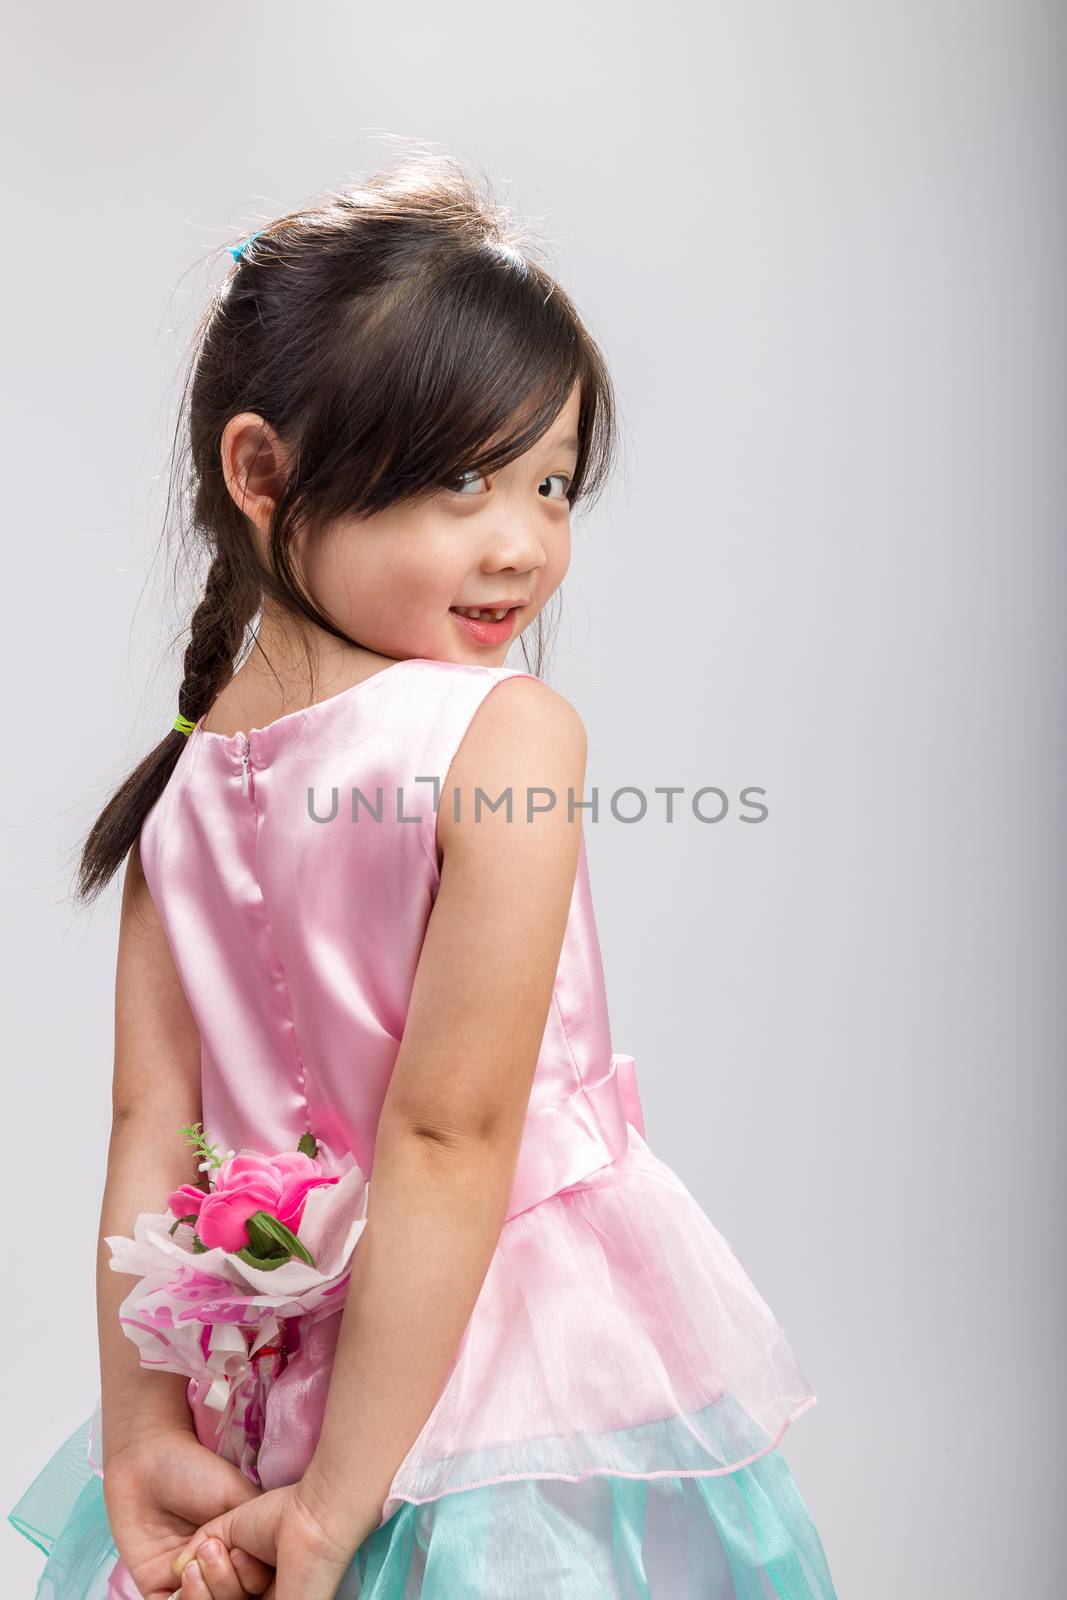 Kid Holding Flower, Rear View / Kid Holding Flower / Rear View o by supparsorn